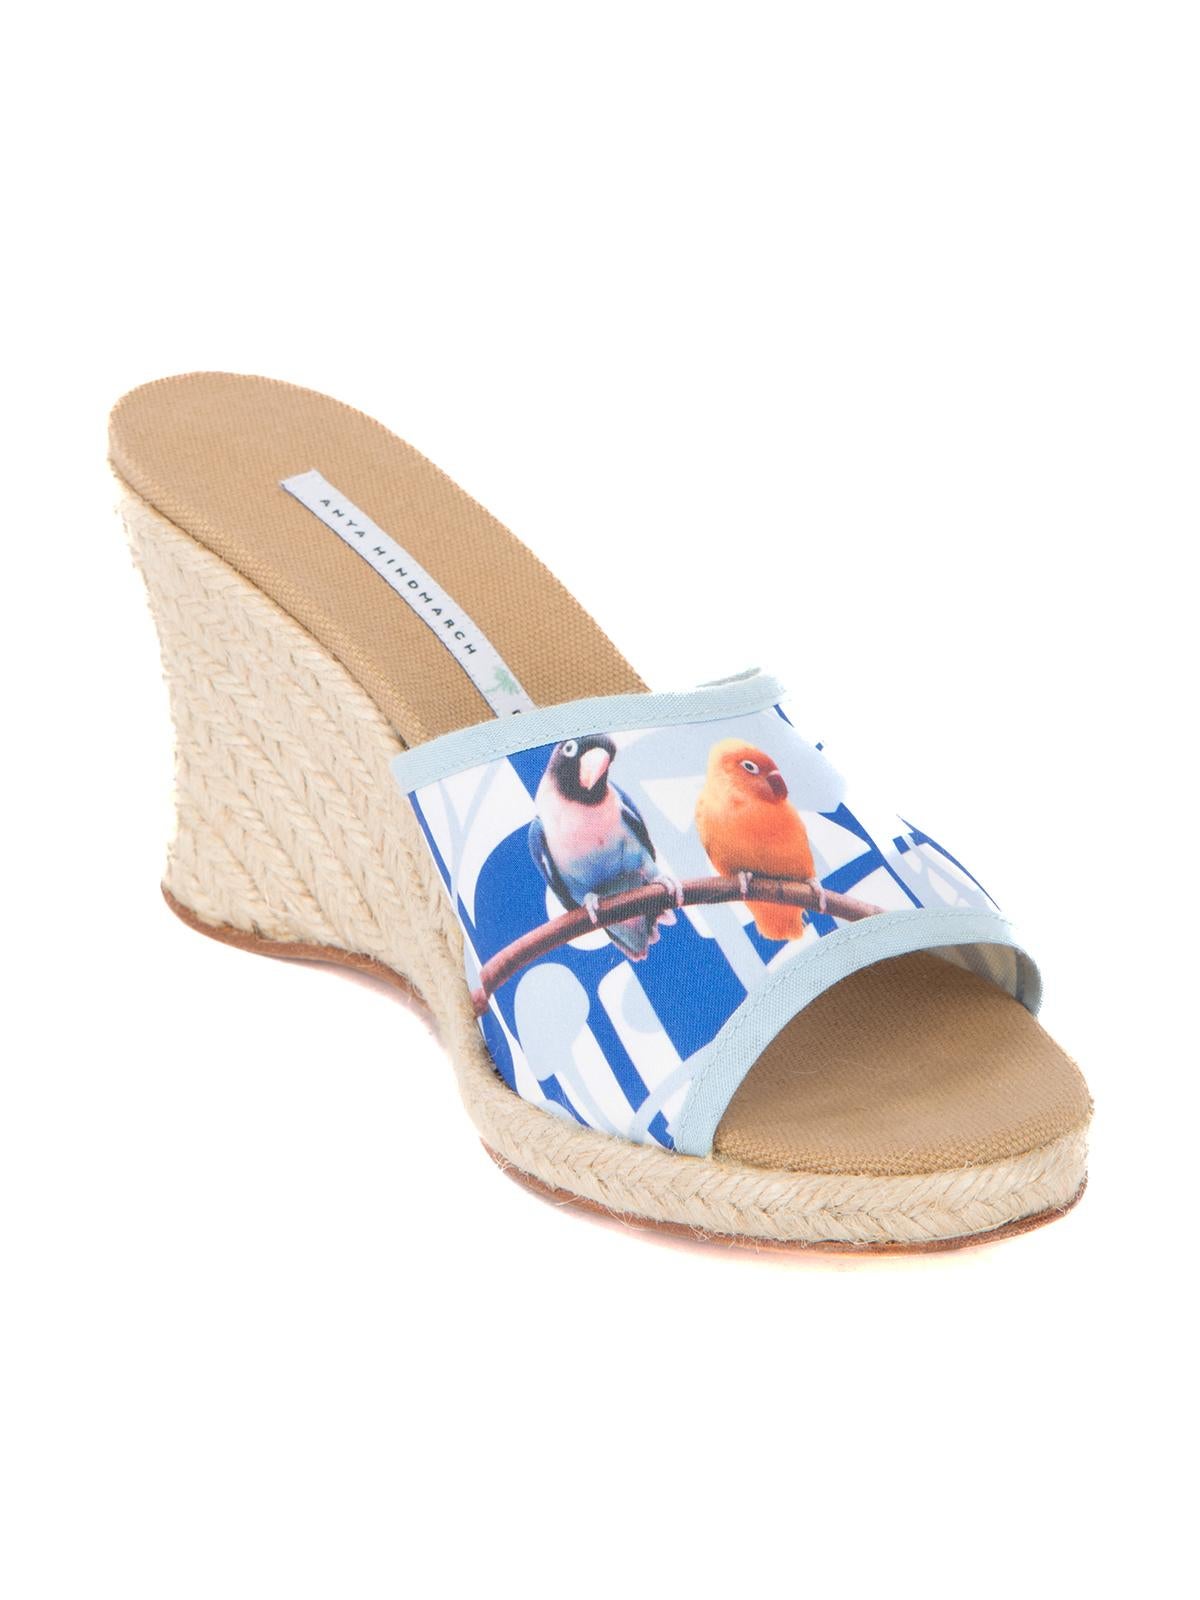 CONDITION is Very Good. Hardly any wear to sandal is evident on this used Anya Hindmarch designer resale item.   Details  Blue Cloth Wedge sandal Peep toe Printed pattern detail Slip on fastening Brand name on inner and outer soles    Made in Spain